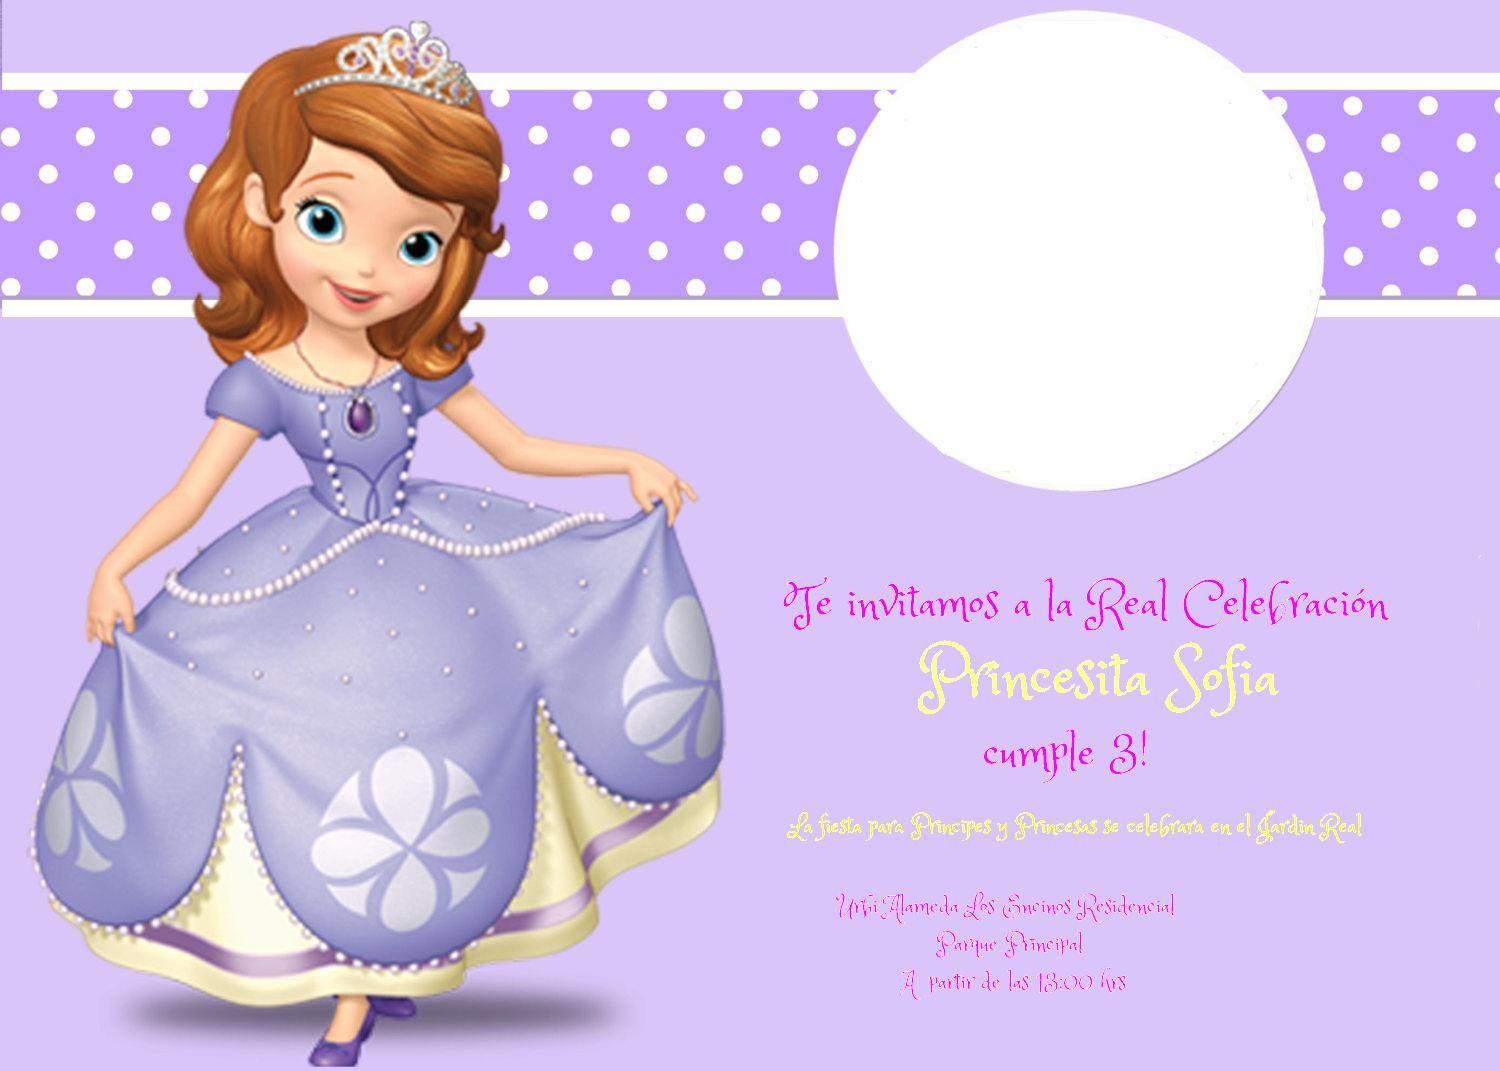 Sofia The First Wallpapers Wallpaper Cave We hope you enjoy our growing collection of hd images to use as a background or home screen for your smartphone or computer. sofia the first wallpapers wallpaper cave